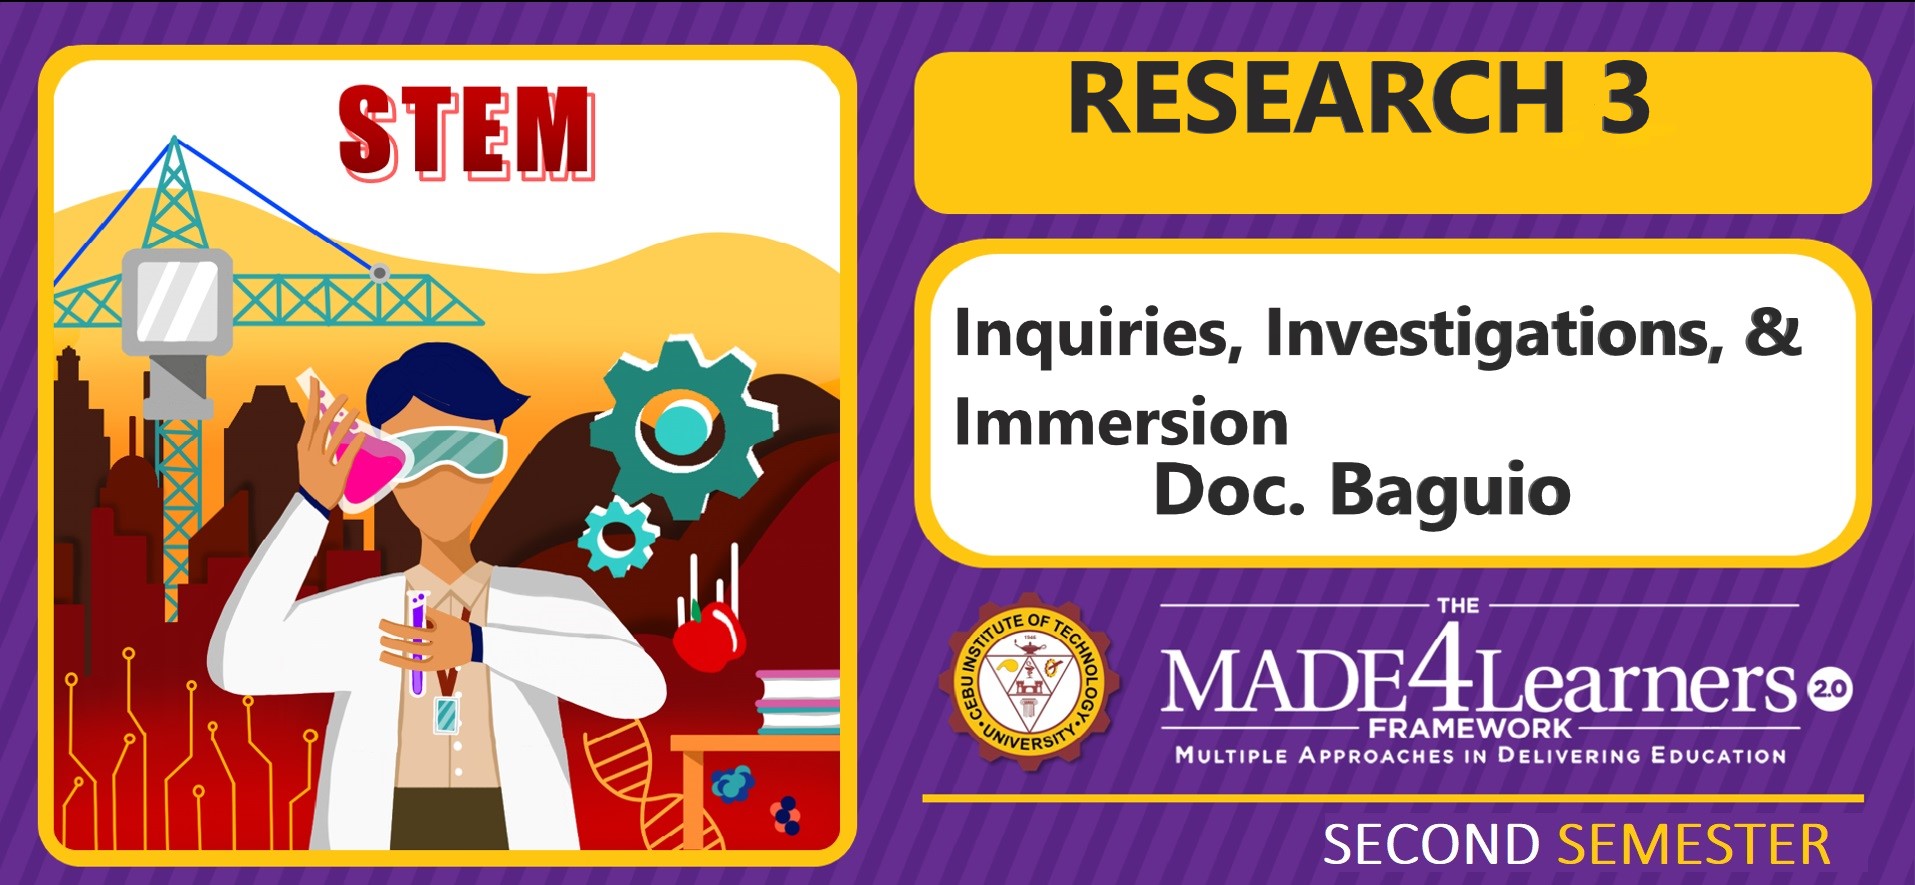 RES3: Research Inquiries, Investigation and Immersion (Baguio)